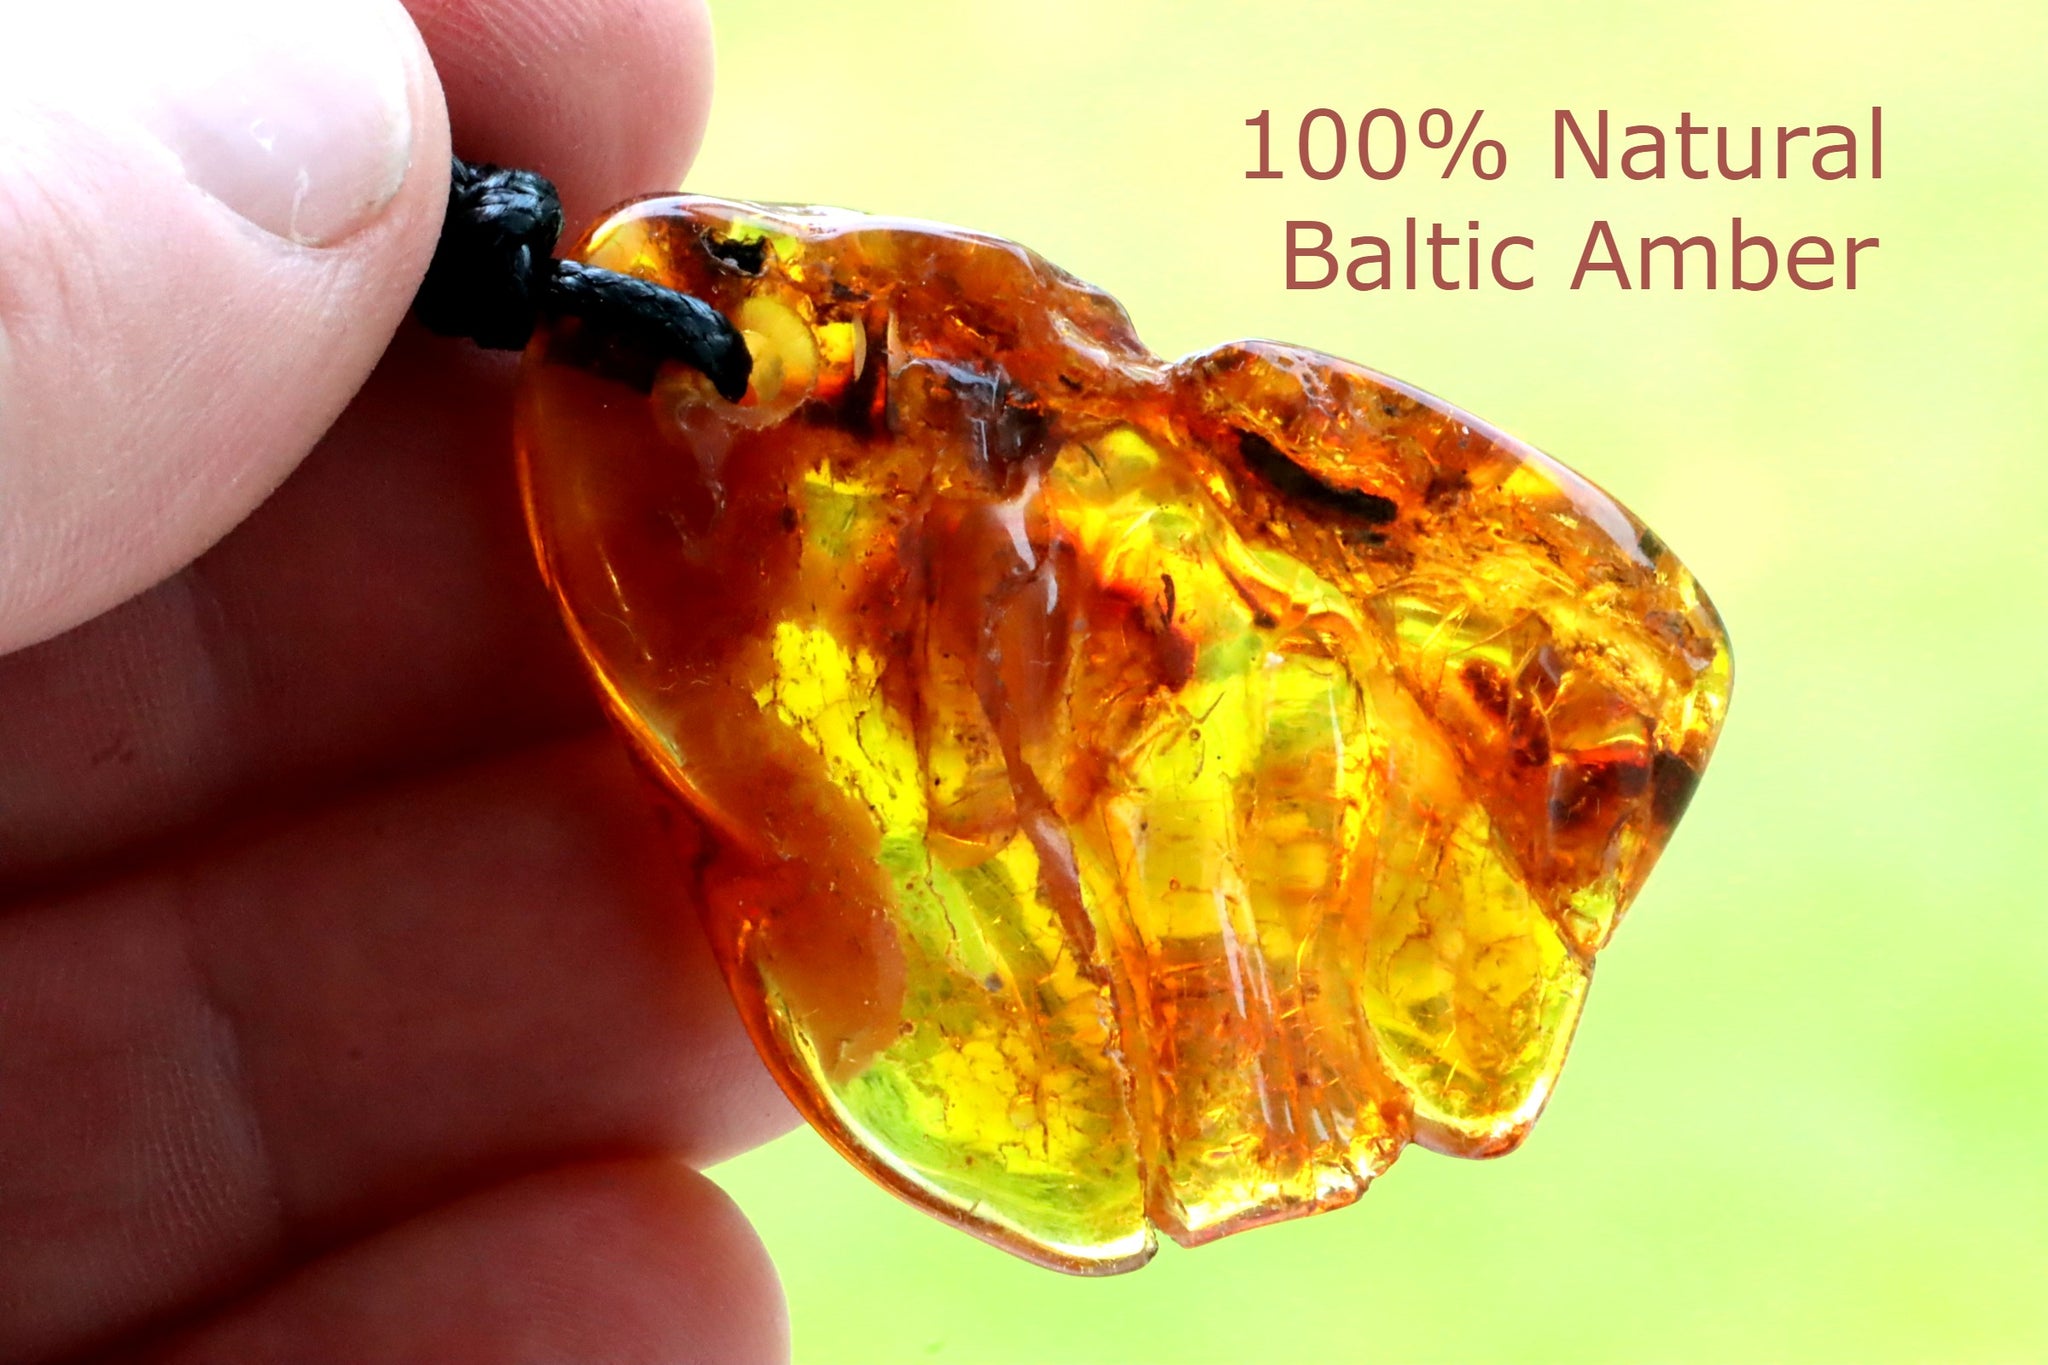 Natural Baltic Amber Amulet Pendant for Mindfulness and Protection